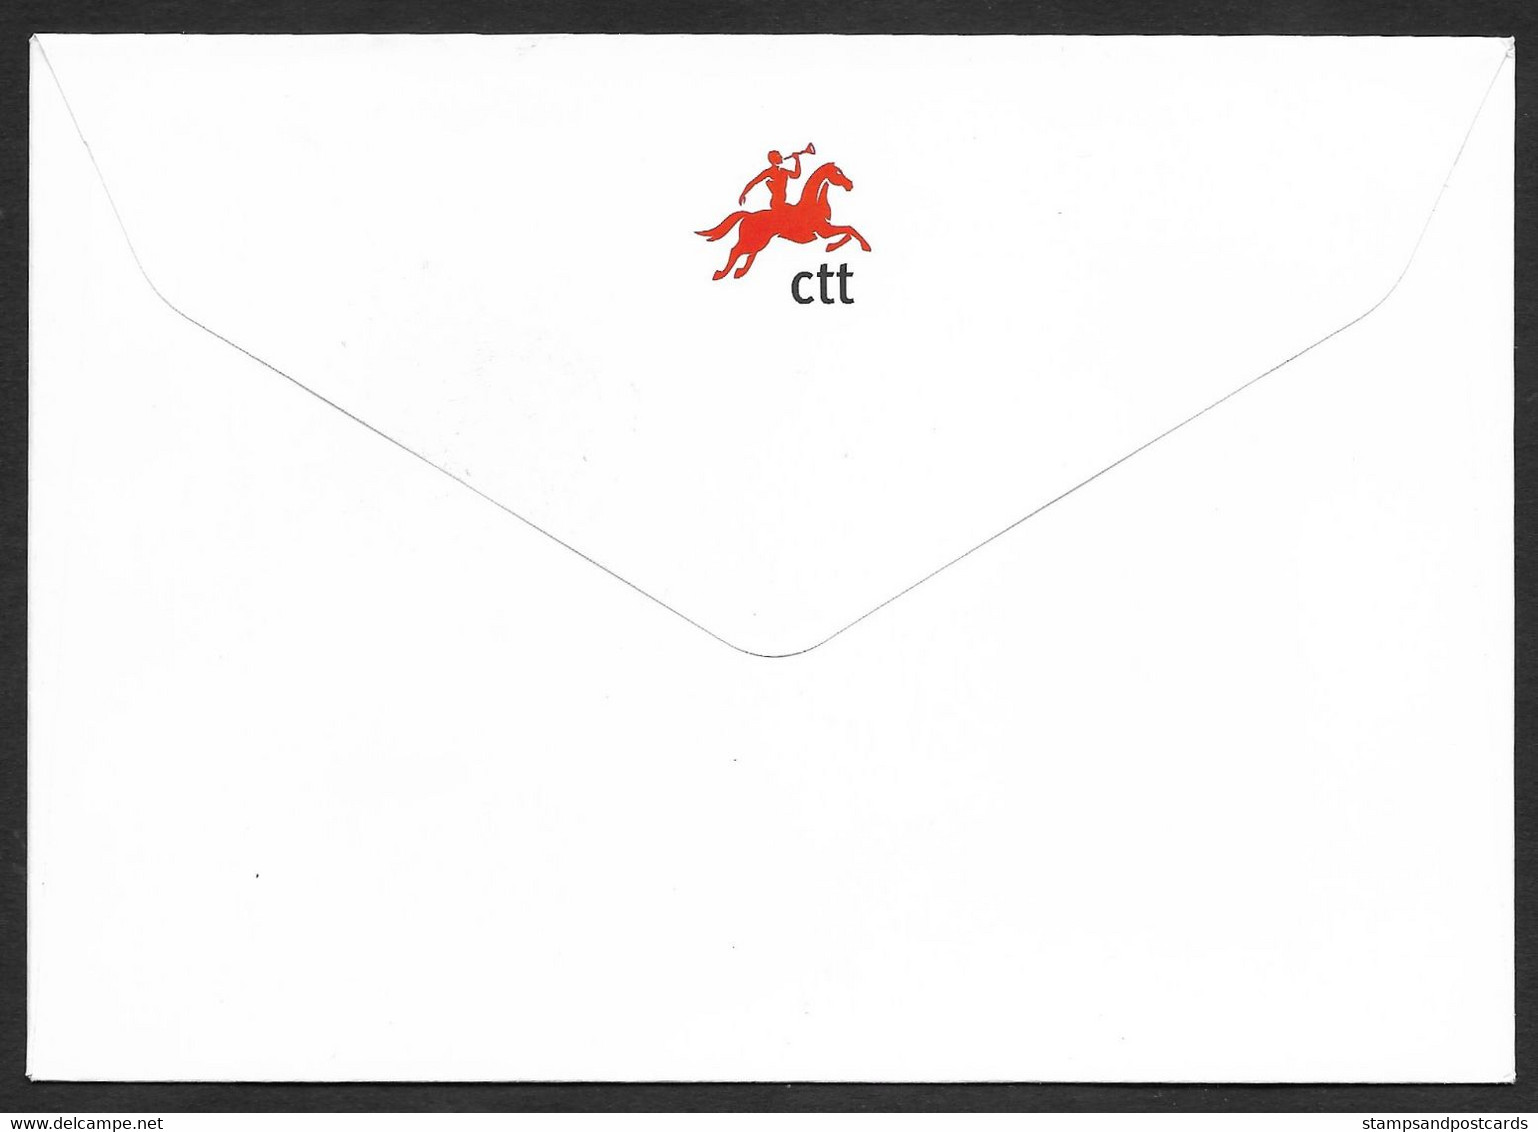 Portugal Lettre Timbre Personnalisé Journée Mondiale Epargne Coimbra 2009 Cover Personalized Stamp Event Pmk Savings Day - Postal Logo & Postmarks